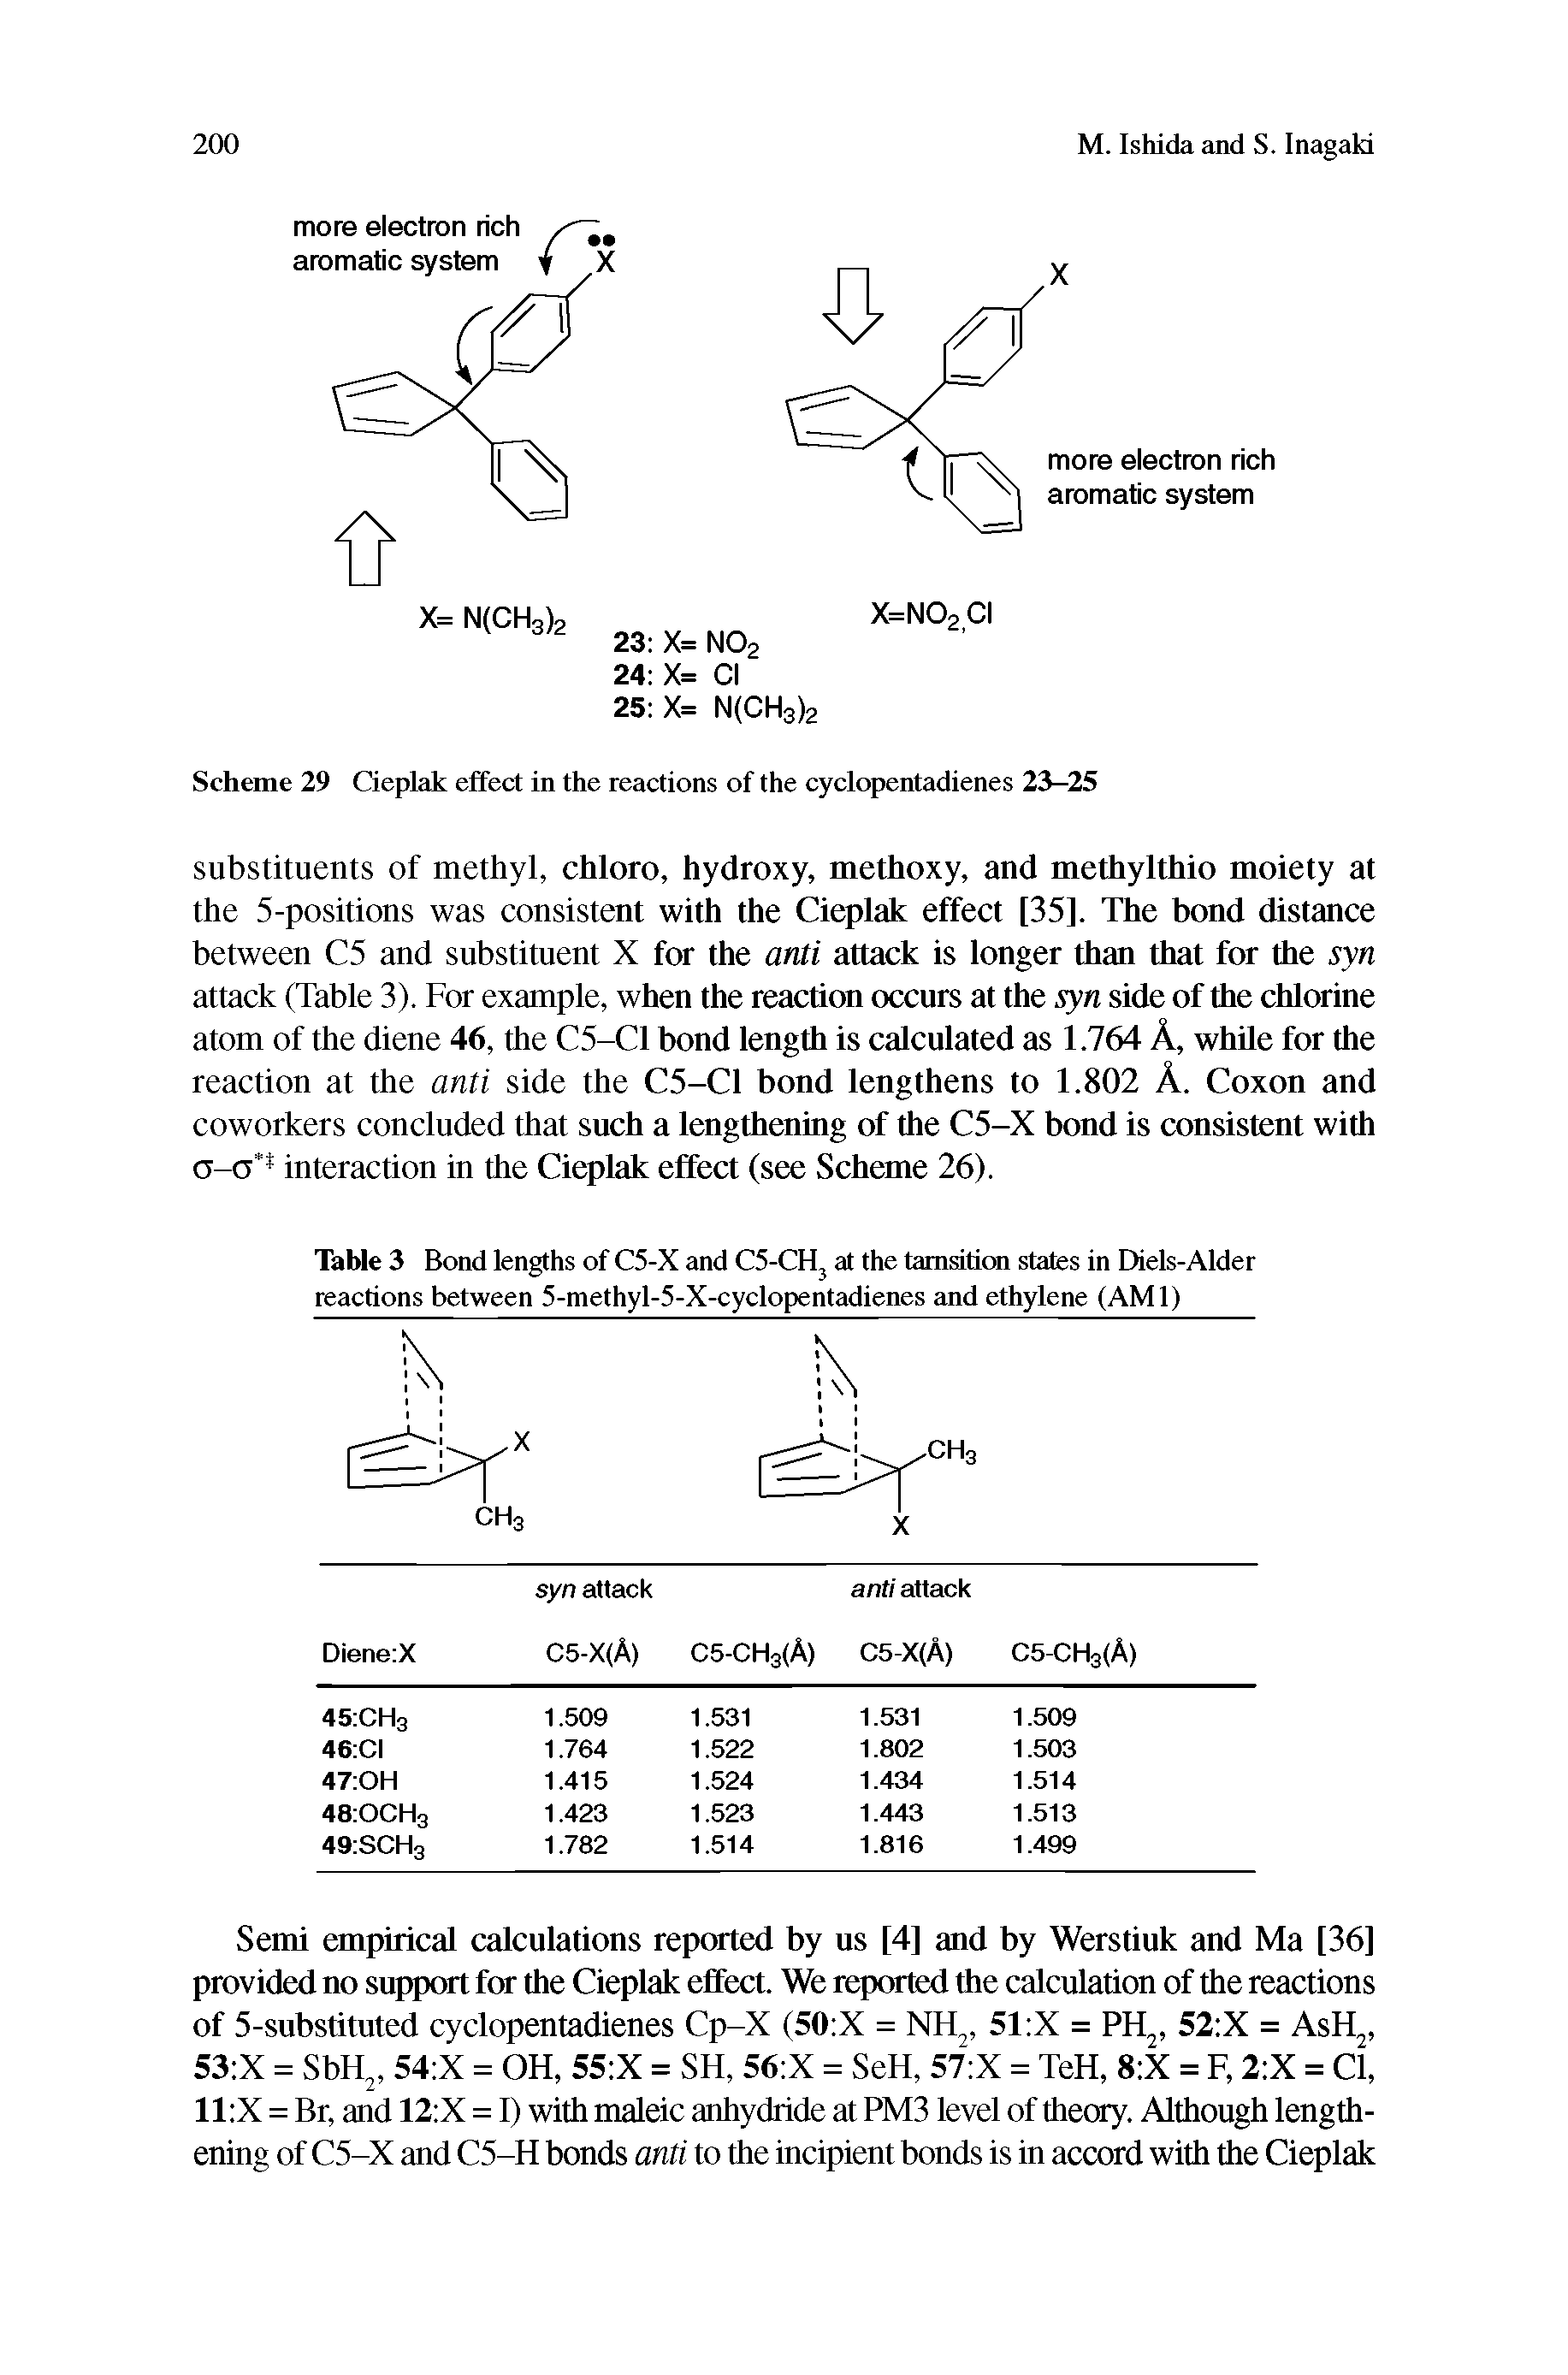 Table 3 Bond lengths of C5-X and C5-CHj at the tamsition states in Diels-Alder reactions between 5-methyl-5-X-cyclopentadienes and ethylene (AMI)...